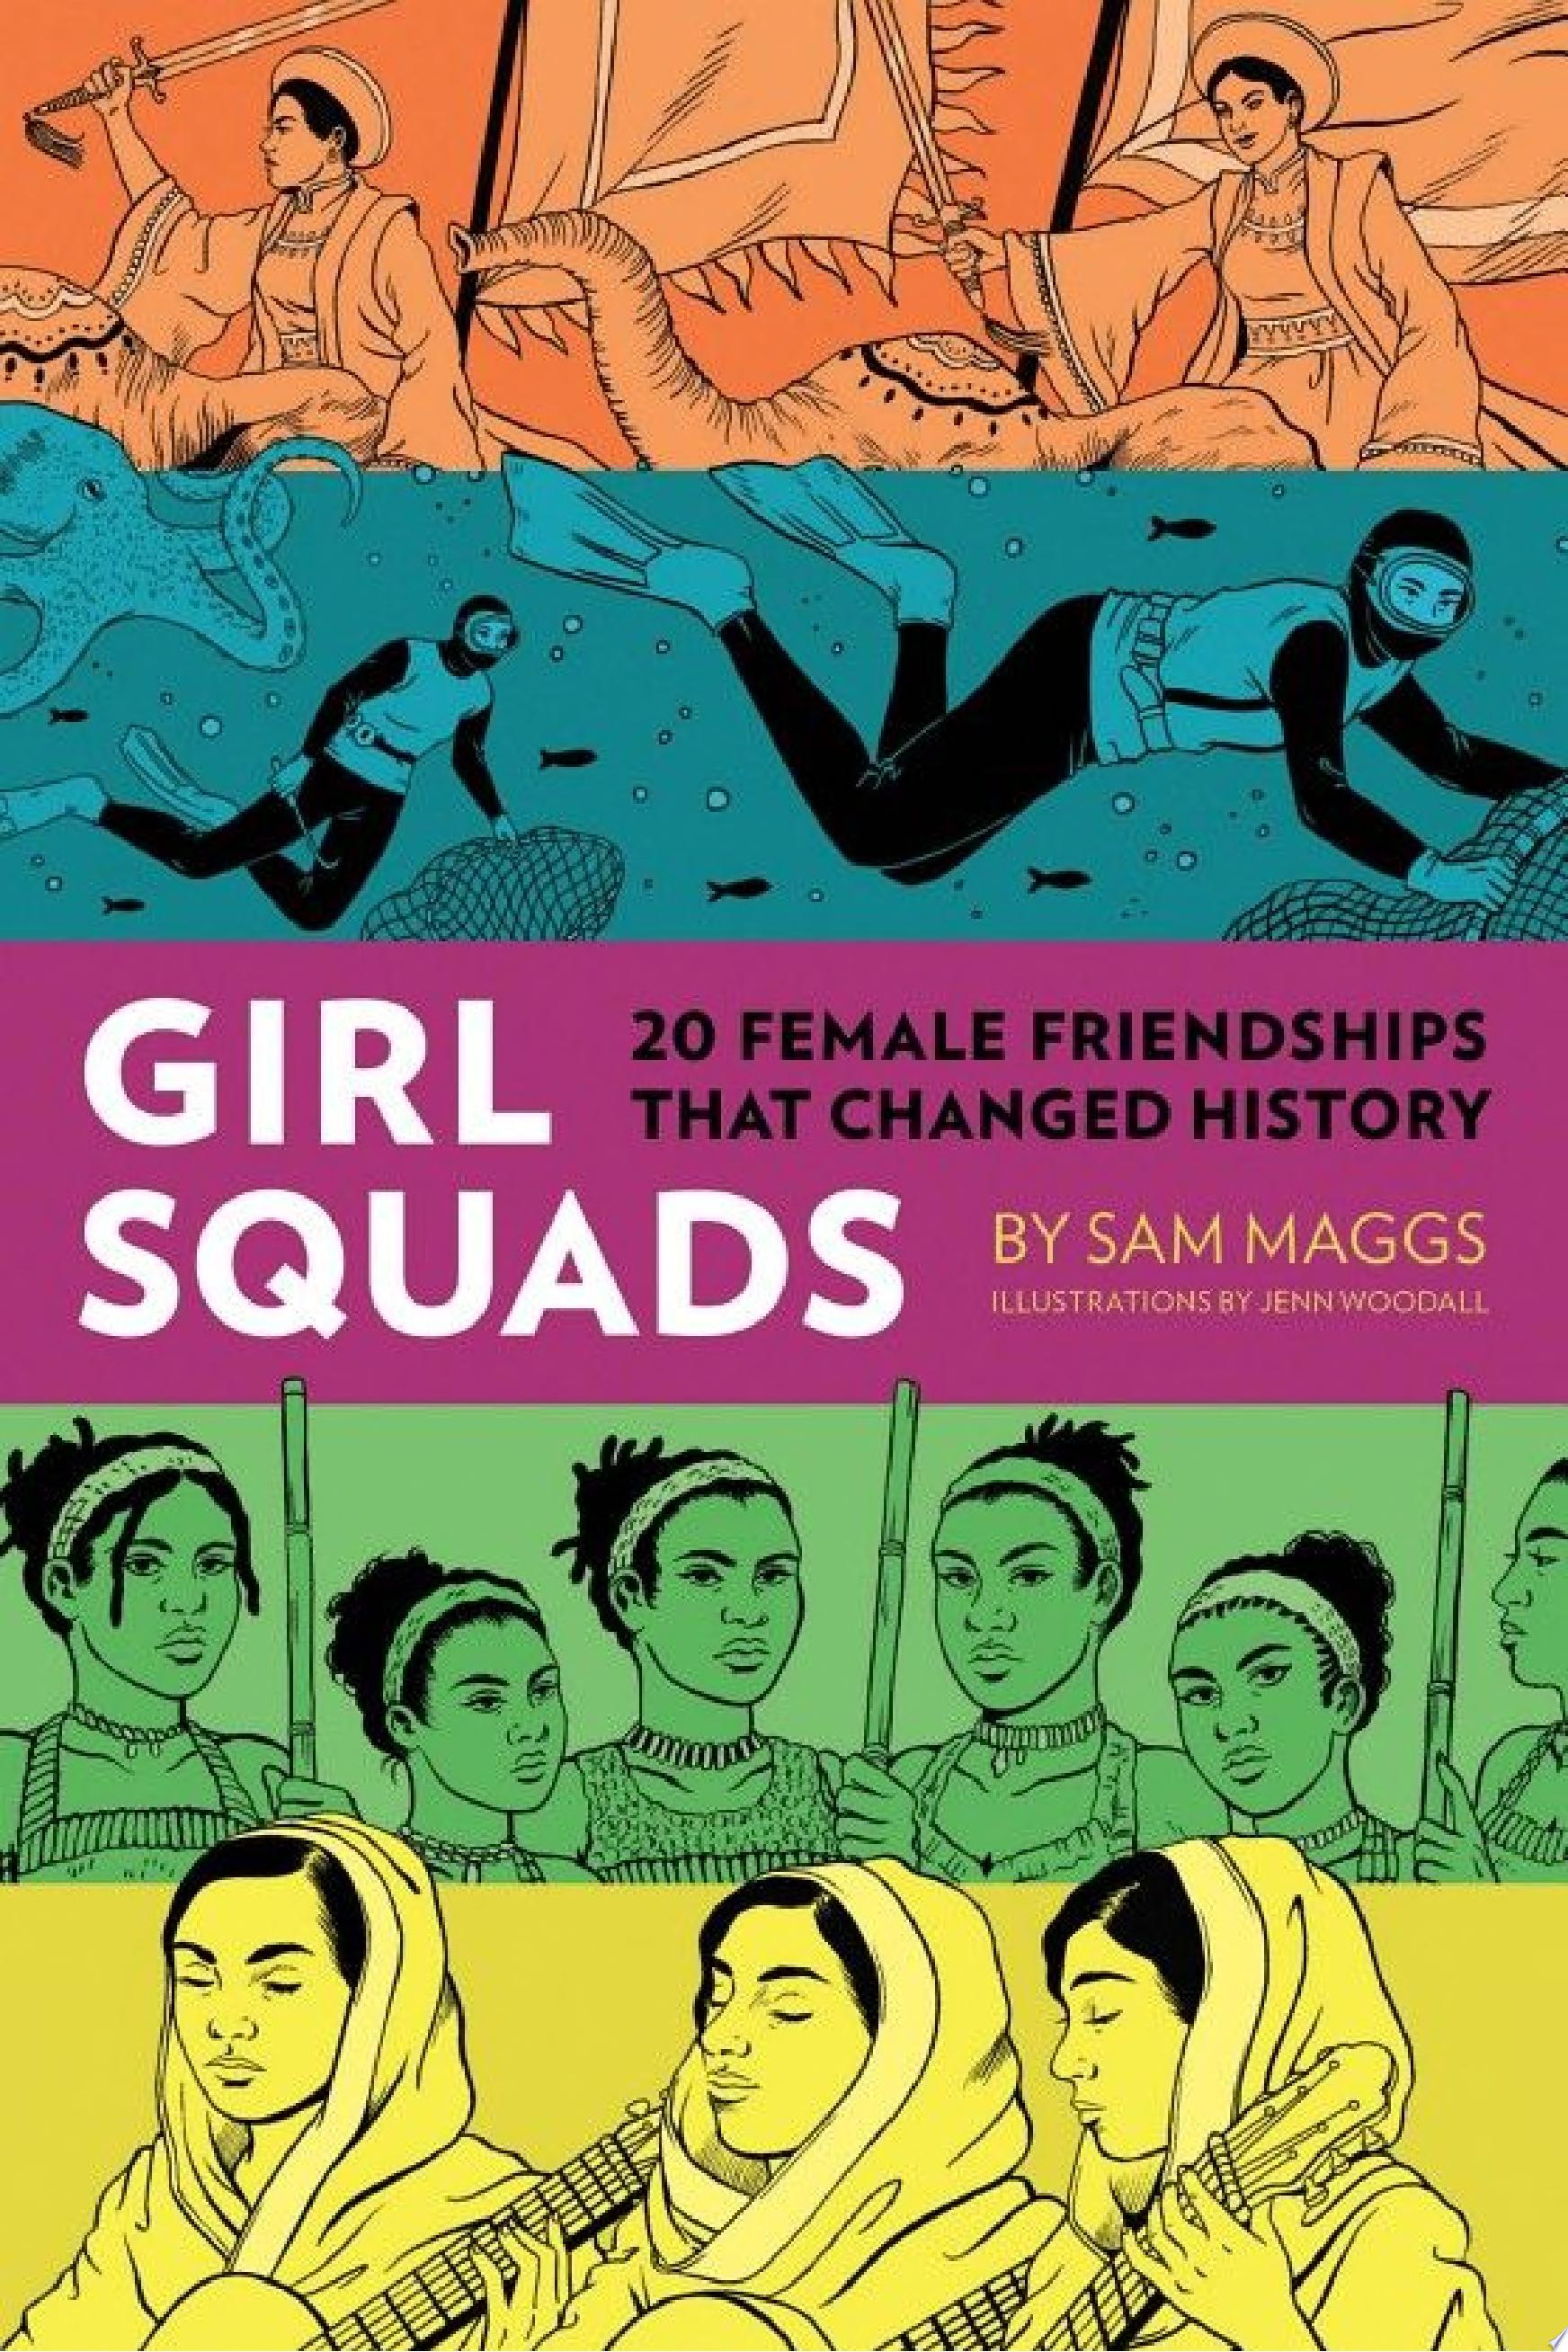 Image for "Girl Squads"